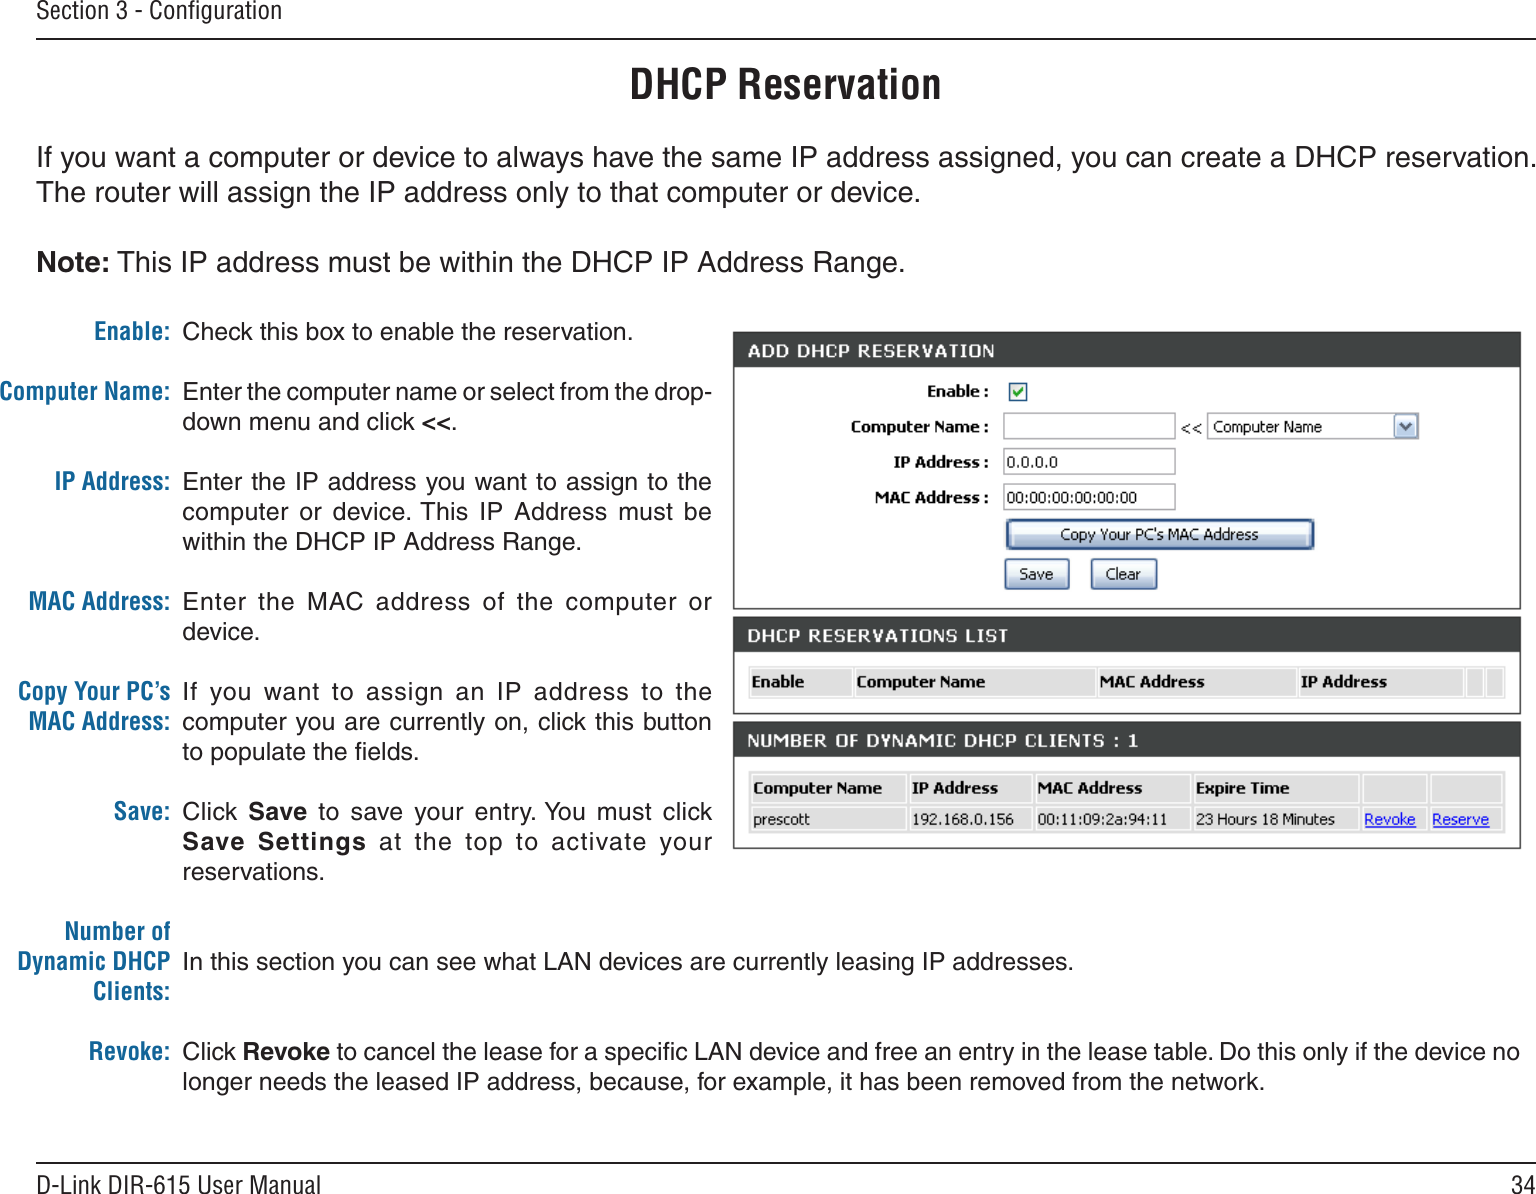 34D-Link DIR-615 User ManualSection 3 - ConﬁgurationDHCP ReservationIf you want a computer or device to always have the same IP address assigned, you can create a DHCP reservation. The router will assign the IP address only to that computer or device. Note: This IP address must be within the DHCP IP Address Range.Check this box to enable the reservation.Enter the computer name or select from the drop-down menu and click &lt;&lt;.Enter the IP address you want to assign to the computer  or  device. This  IP  Address  must  be within the DHCP IP Address Range.Enter  the  MAC address  of  the  computer  or device.If  you  want  to  assign  an  IP  address  to  the computer you are currently on, click this button to populate the ﬁelds. Click  Save  to  save  your  entry. You  must  click Save  Settings  at  the  top  to  activate  your reservations. In this section you can see what LAN devices are currently leasing IP addresses.Click Revoke to cancel the lease for a speciﬁc LAN device and free an entry in the lease table. Do this only if the device no longer needs the leased IP address, because, for example, it has been removed from the network.Enable:Computer Name:IP Address:MAC Address:Copy Your PC’s MAC Address:Save:Number of Dynamic DHCP Clients:Revoke: